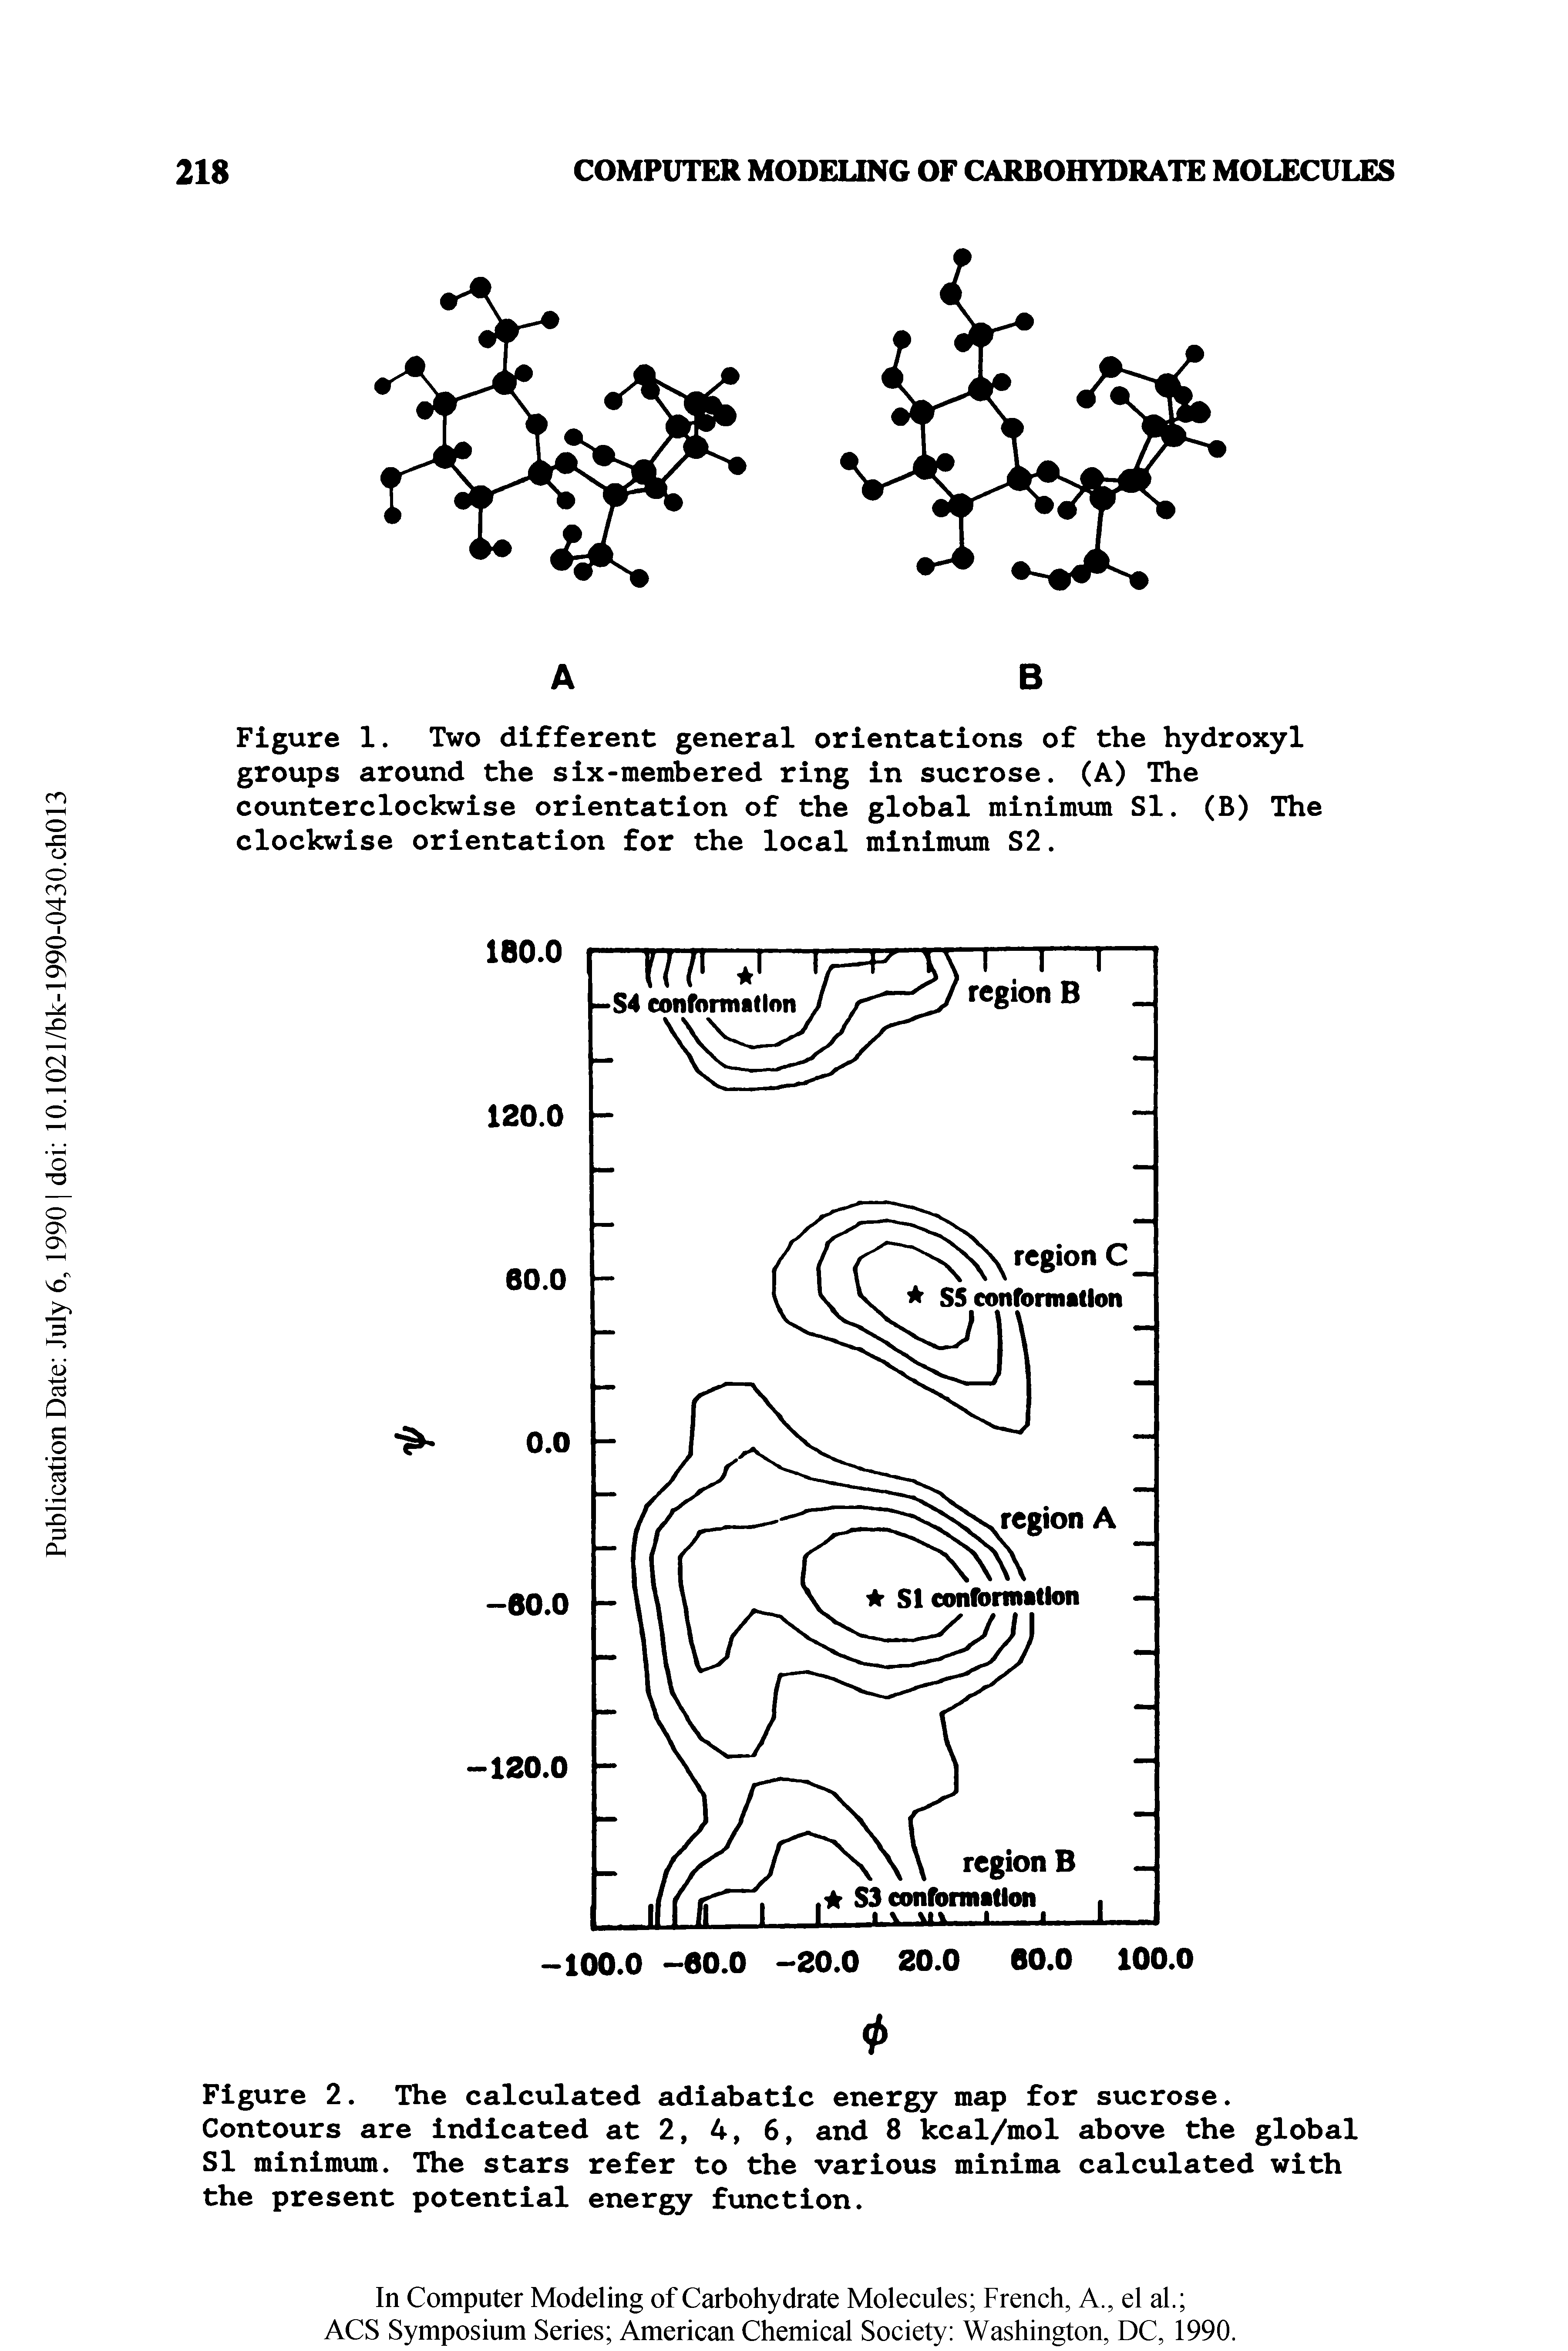 Figure 2. The calculated adiabatic energy map for sucrose. Contours are indicated at 2, 4, 6, and 8 kcal/mol above the global SI minimum. The stars refer to the various minima calculated with the present potential energy function.